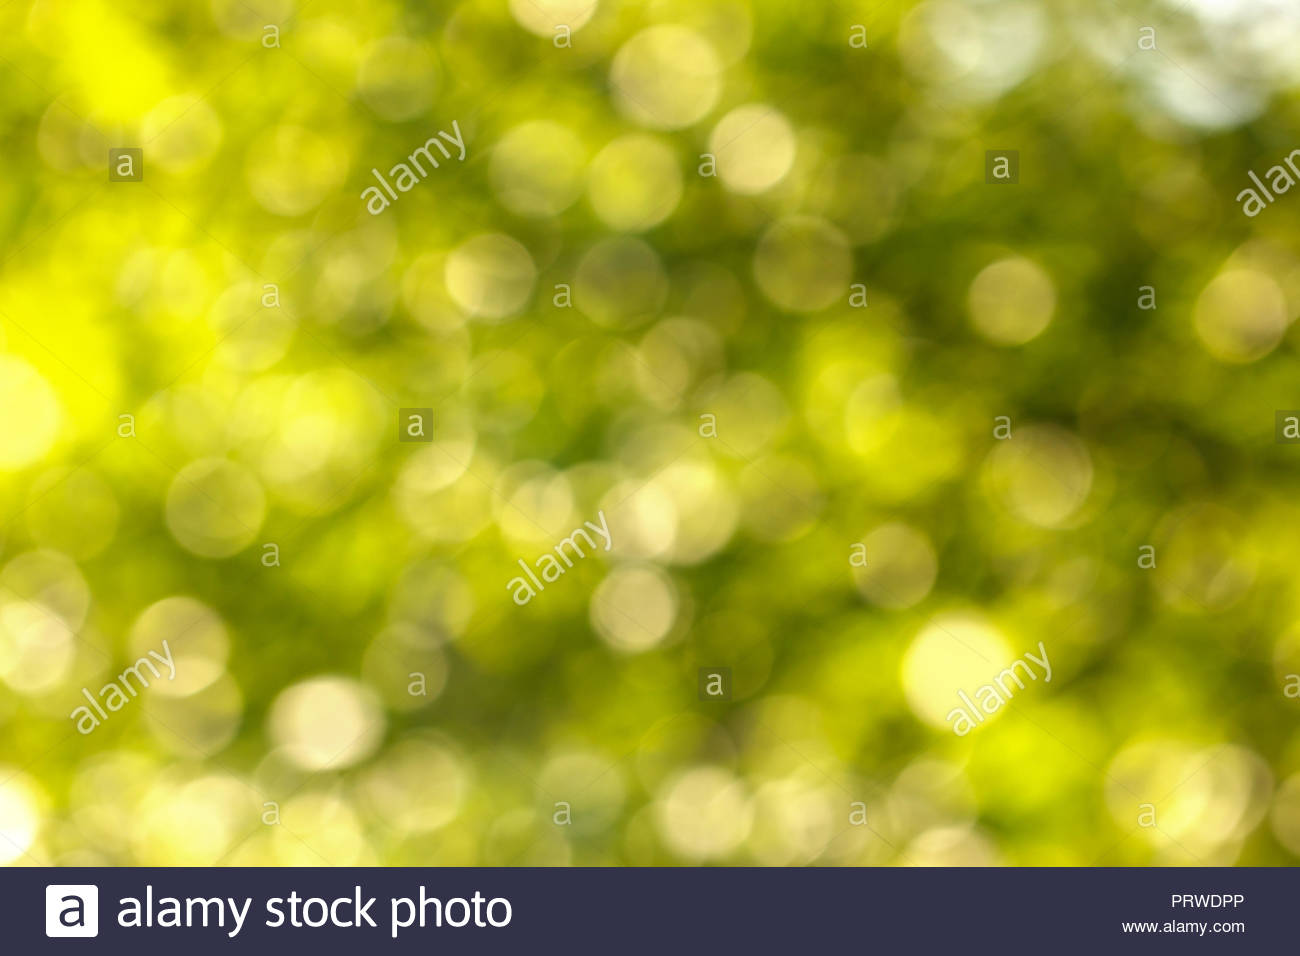 abstract bokeh background natural green color Stock Photo 1300x956